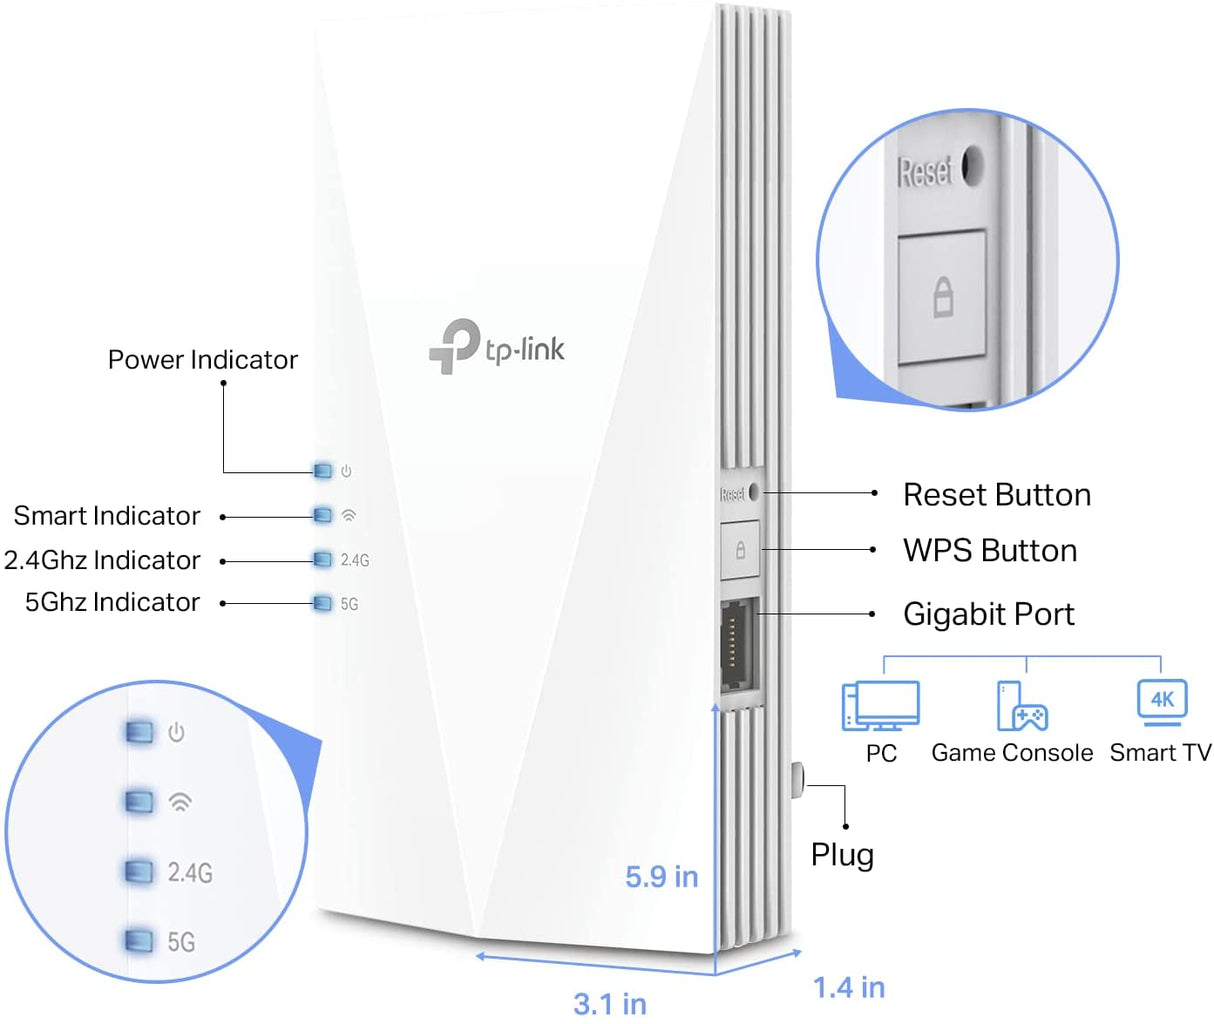 TP-Link WiFi 6 Extender(RE600X)-Internet Booster, Covers up to 1500 sq.ft and 30 Devices, AX1800 Dual Band Wireless Signal Booster Repeater, Gigabit Ethernet Port, AP Mode, OneMesh Compatible AX1800 WiFi 6 Extender(Newer)